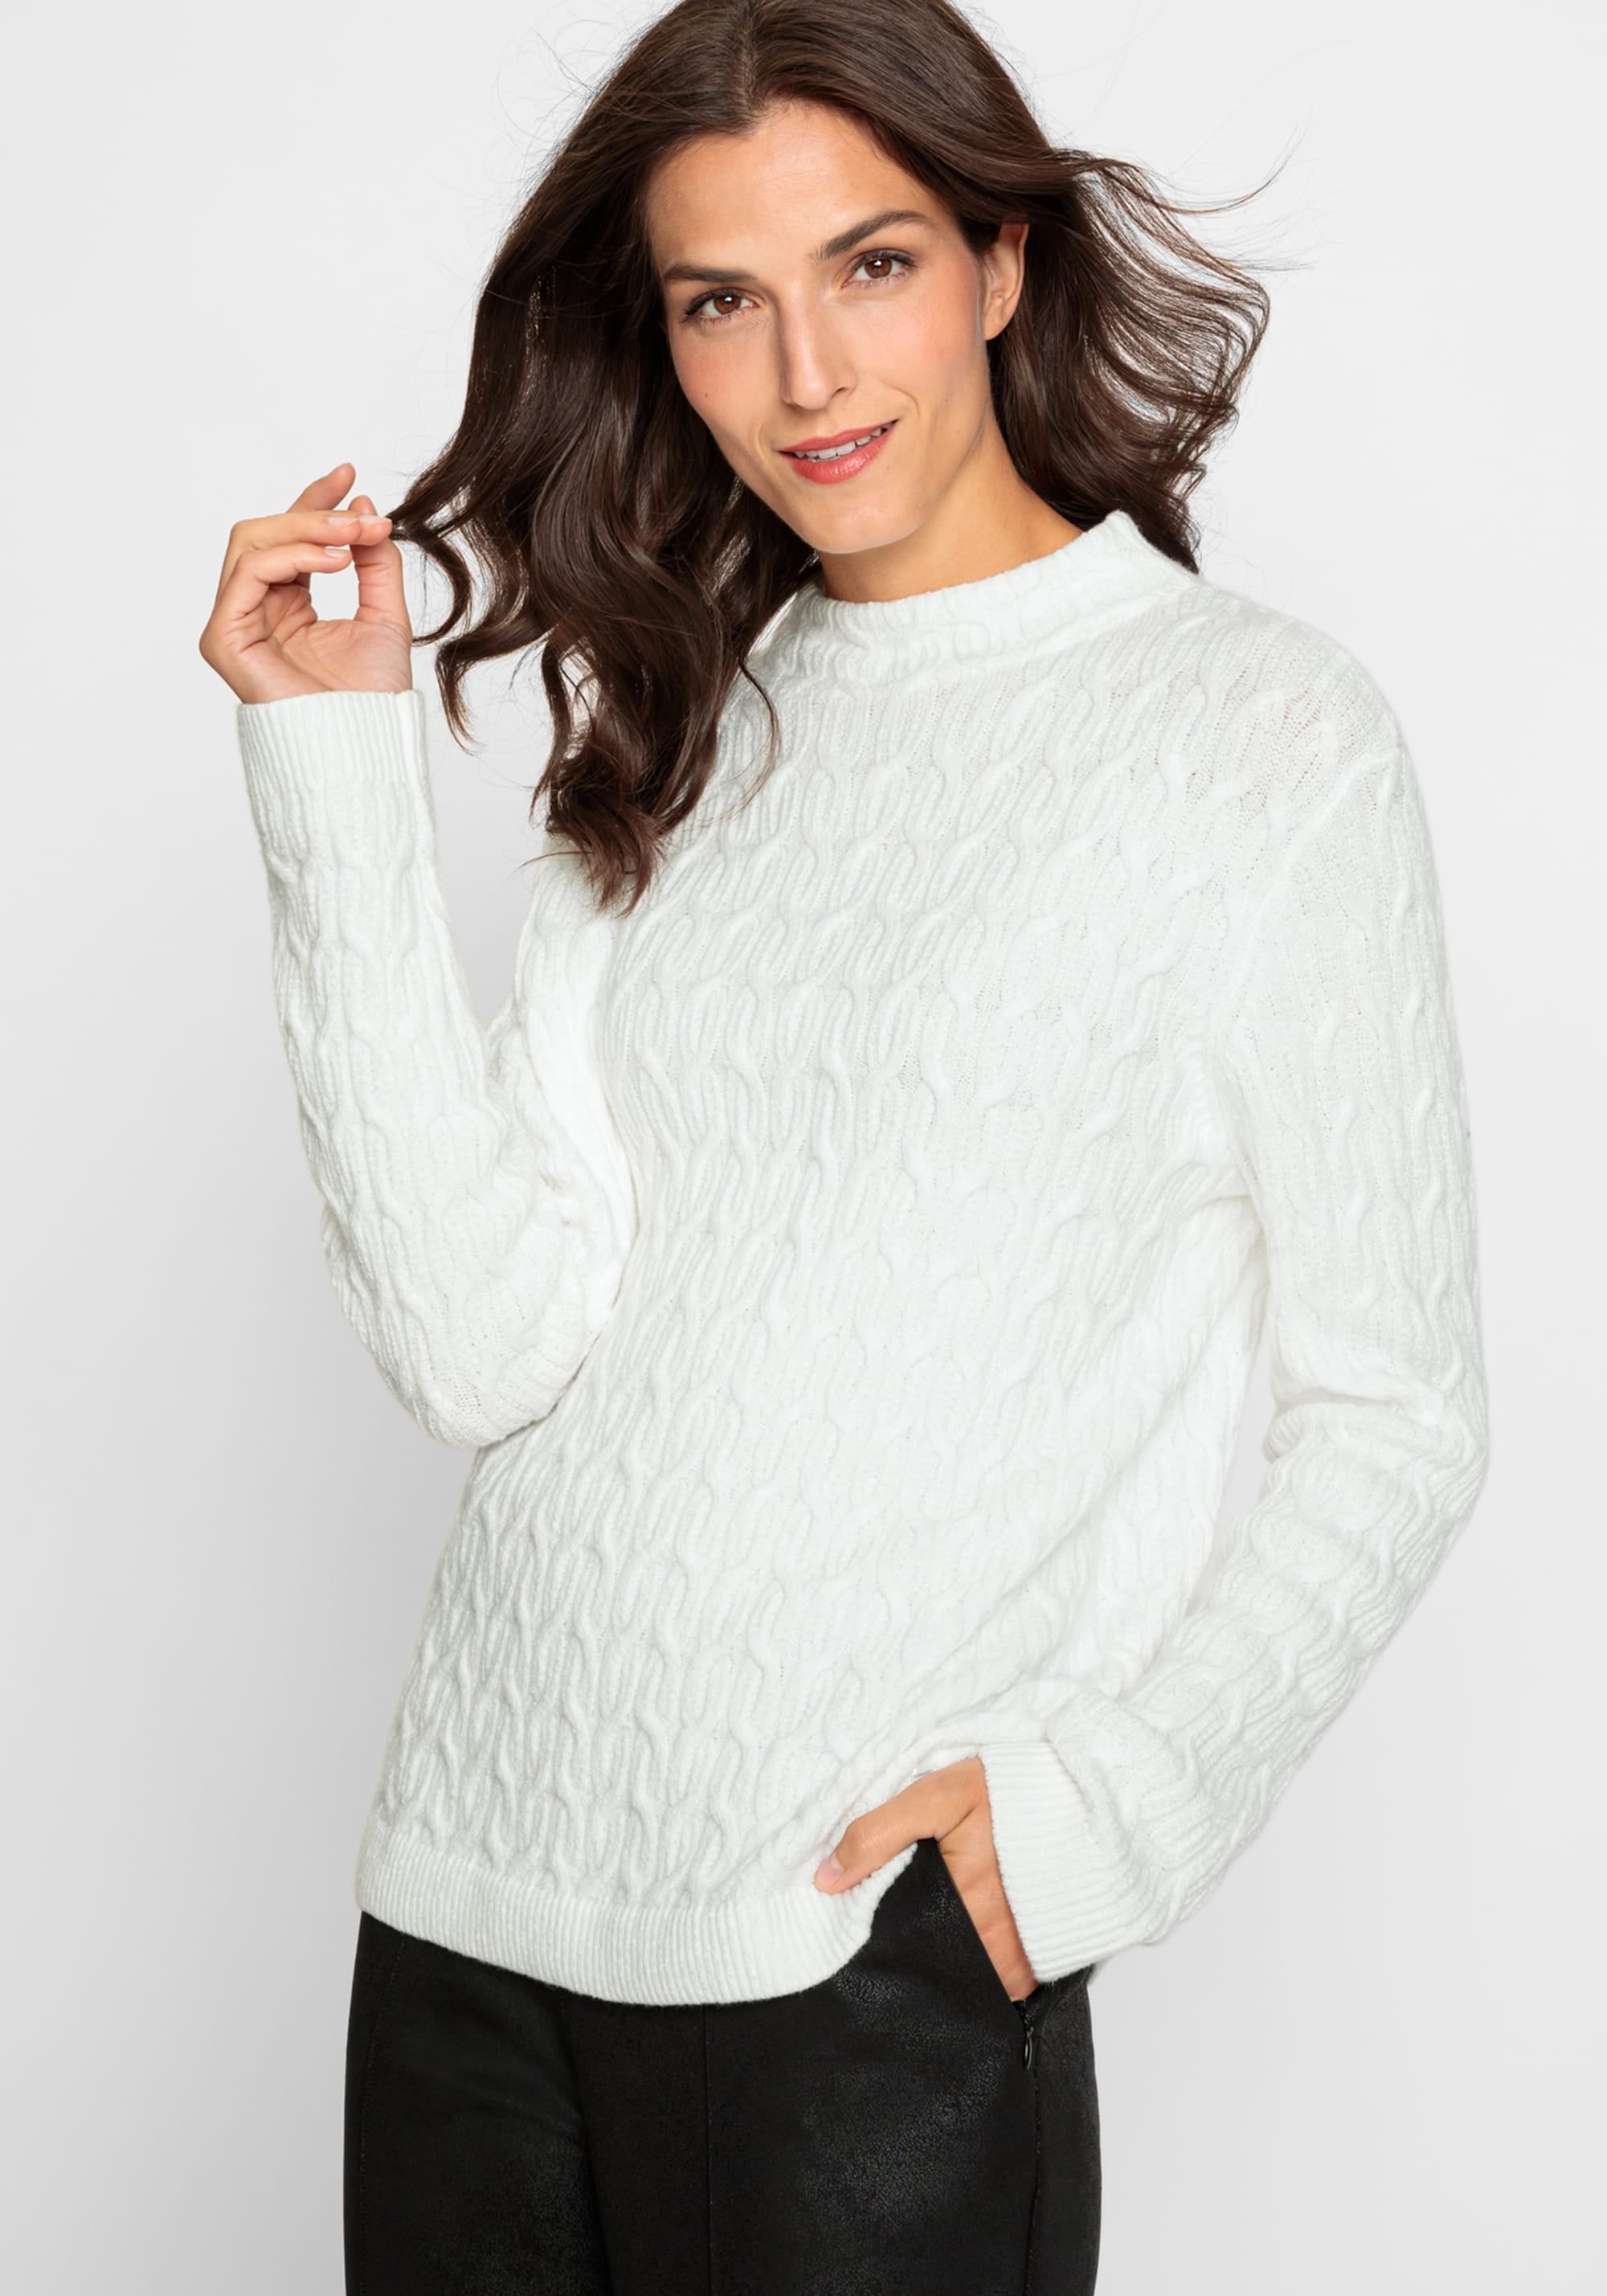 Long-sleeved T-shirt cable knit white wool